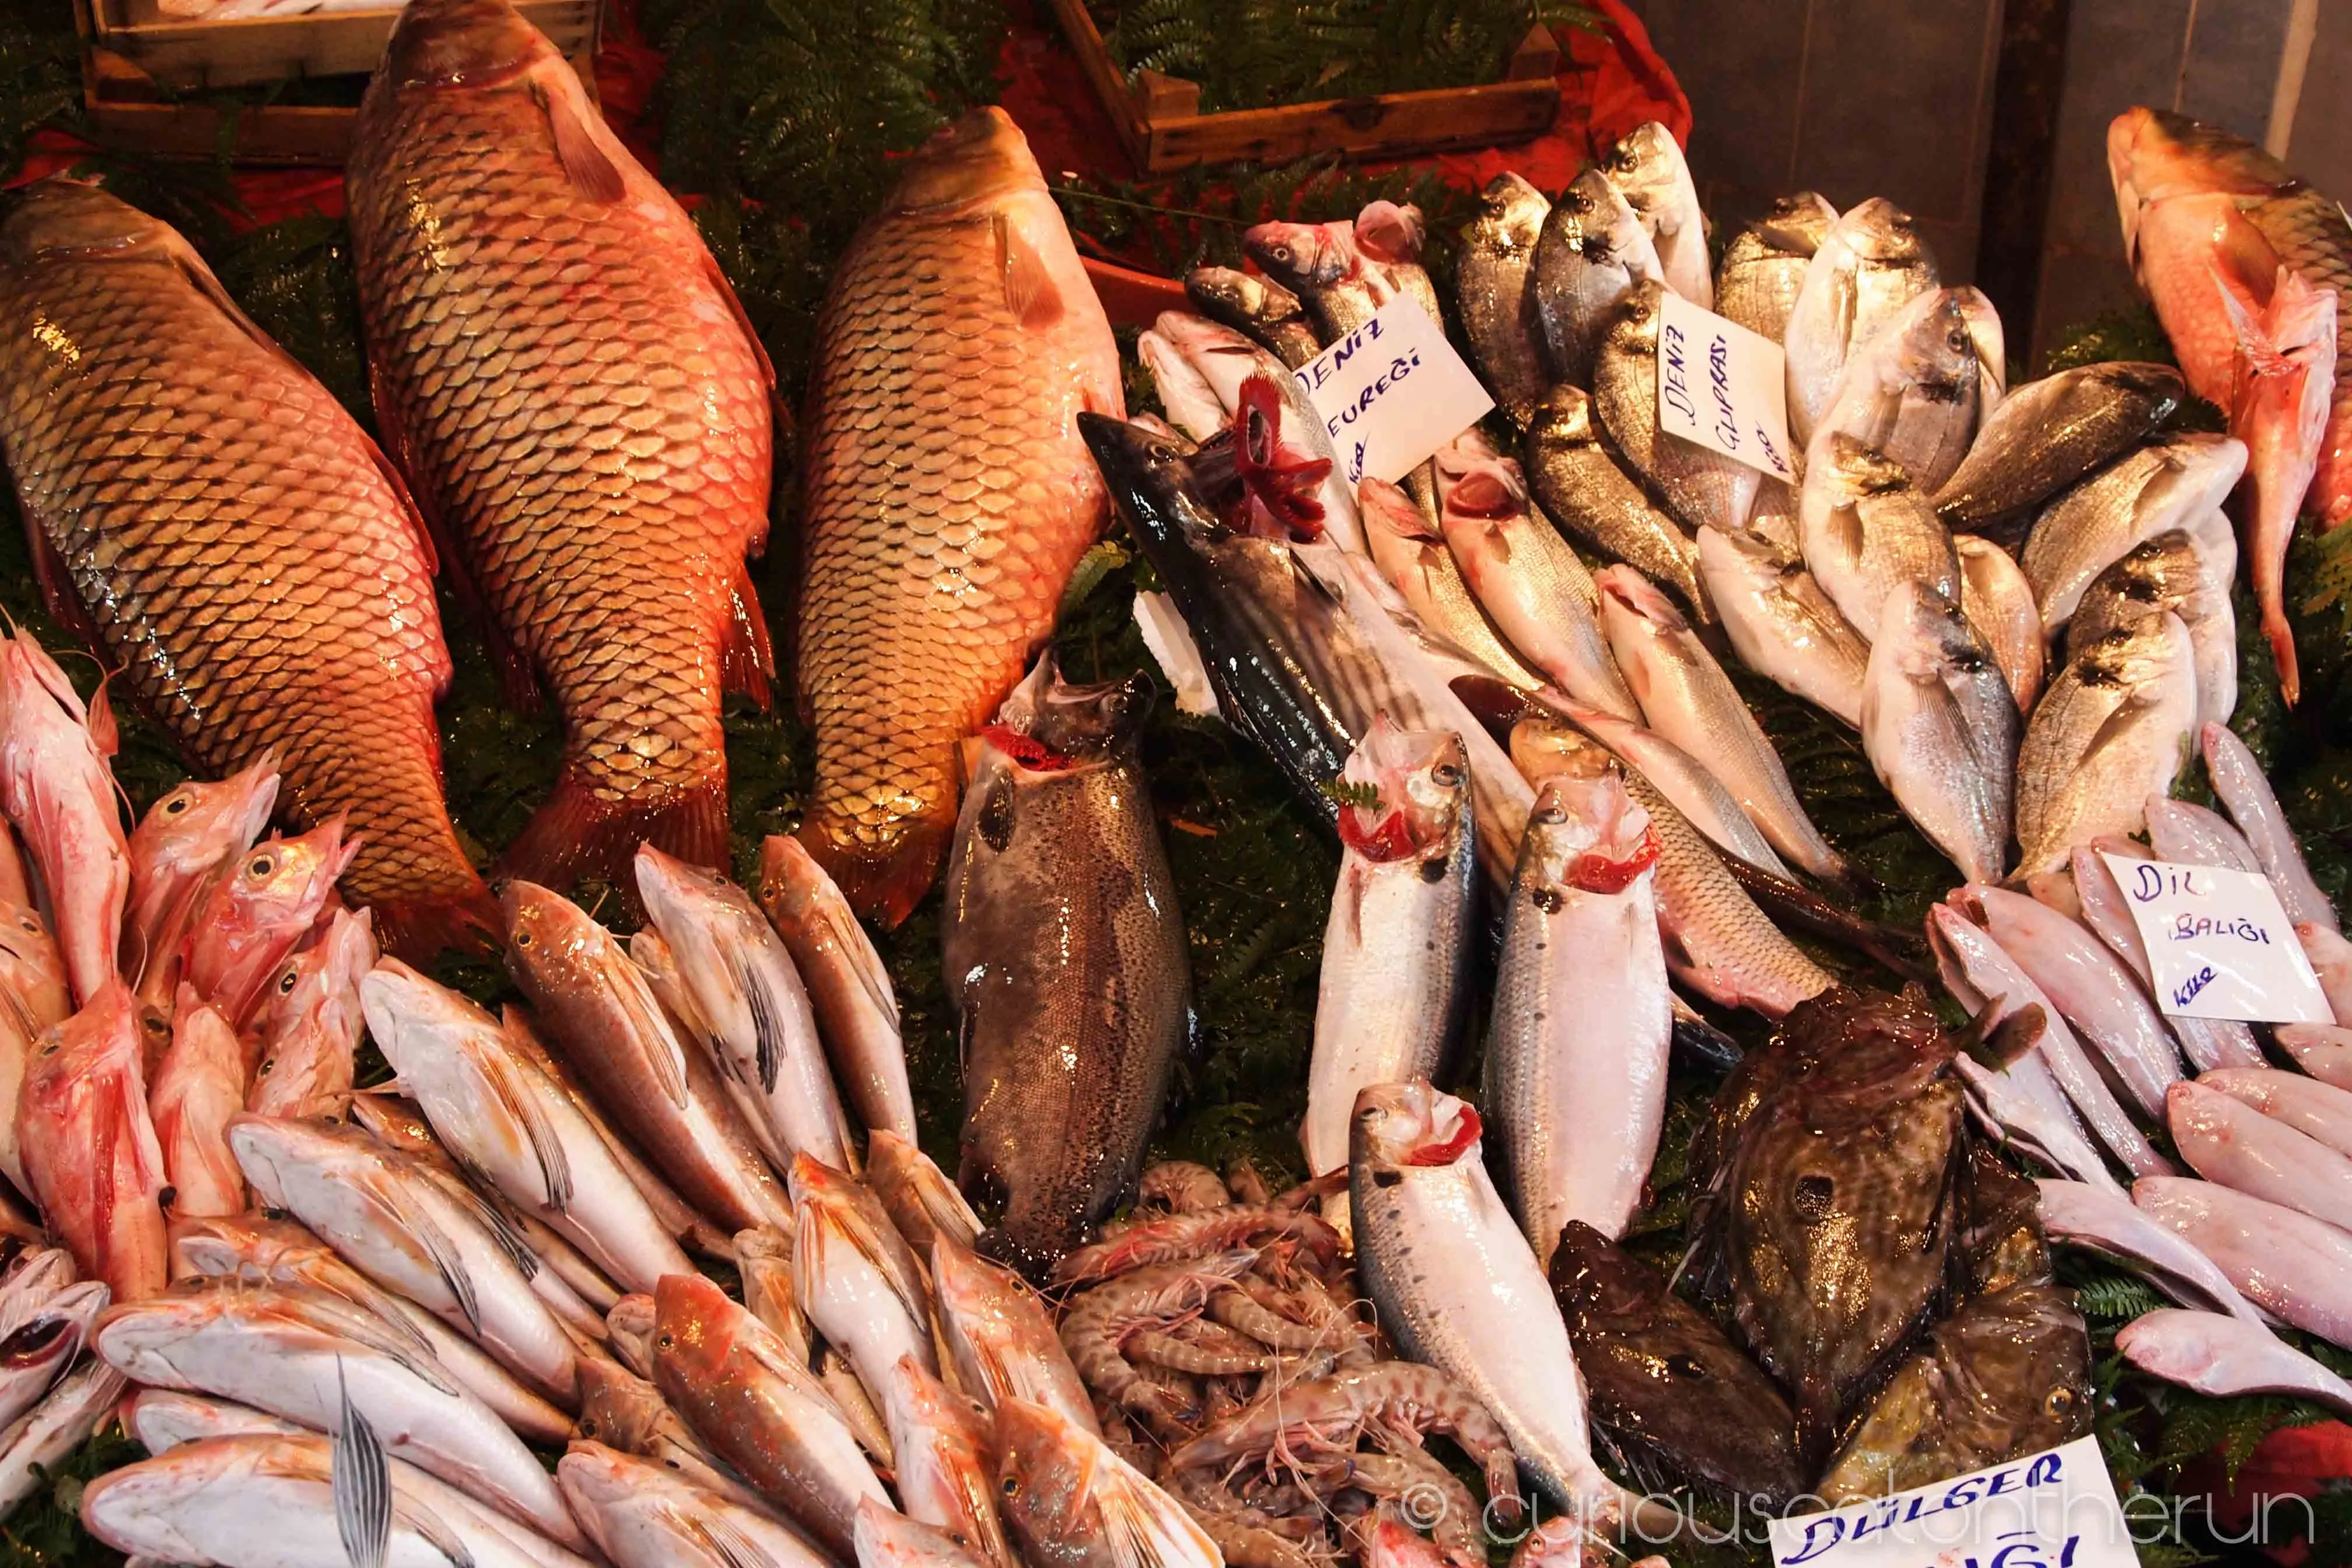 Beyoglu Fish Market in Turkey, central_asia | Seafood - Rated 4.9